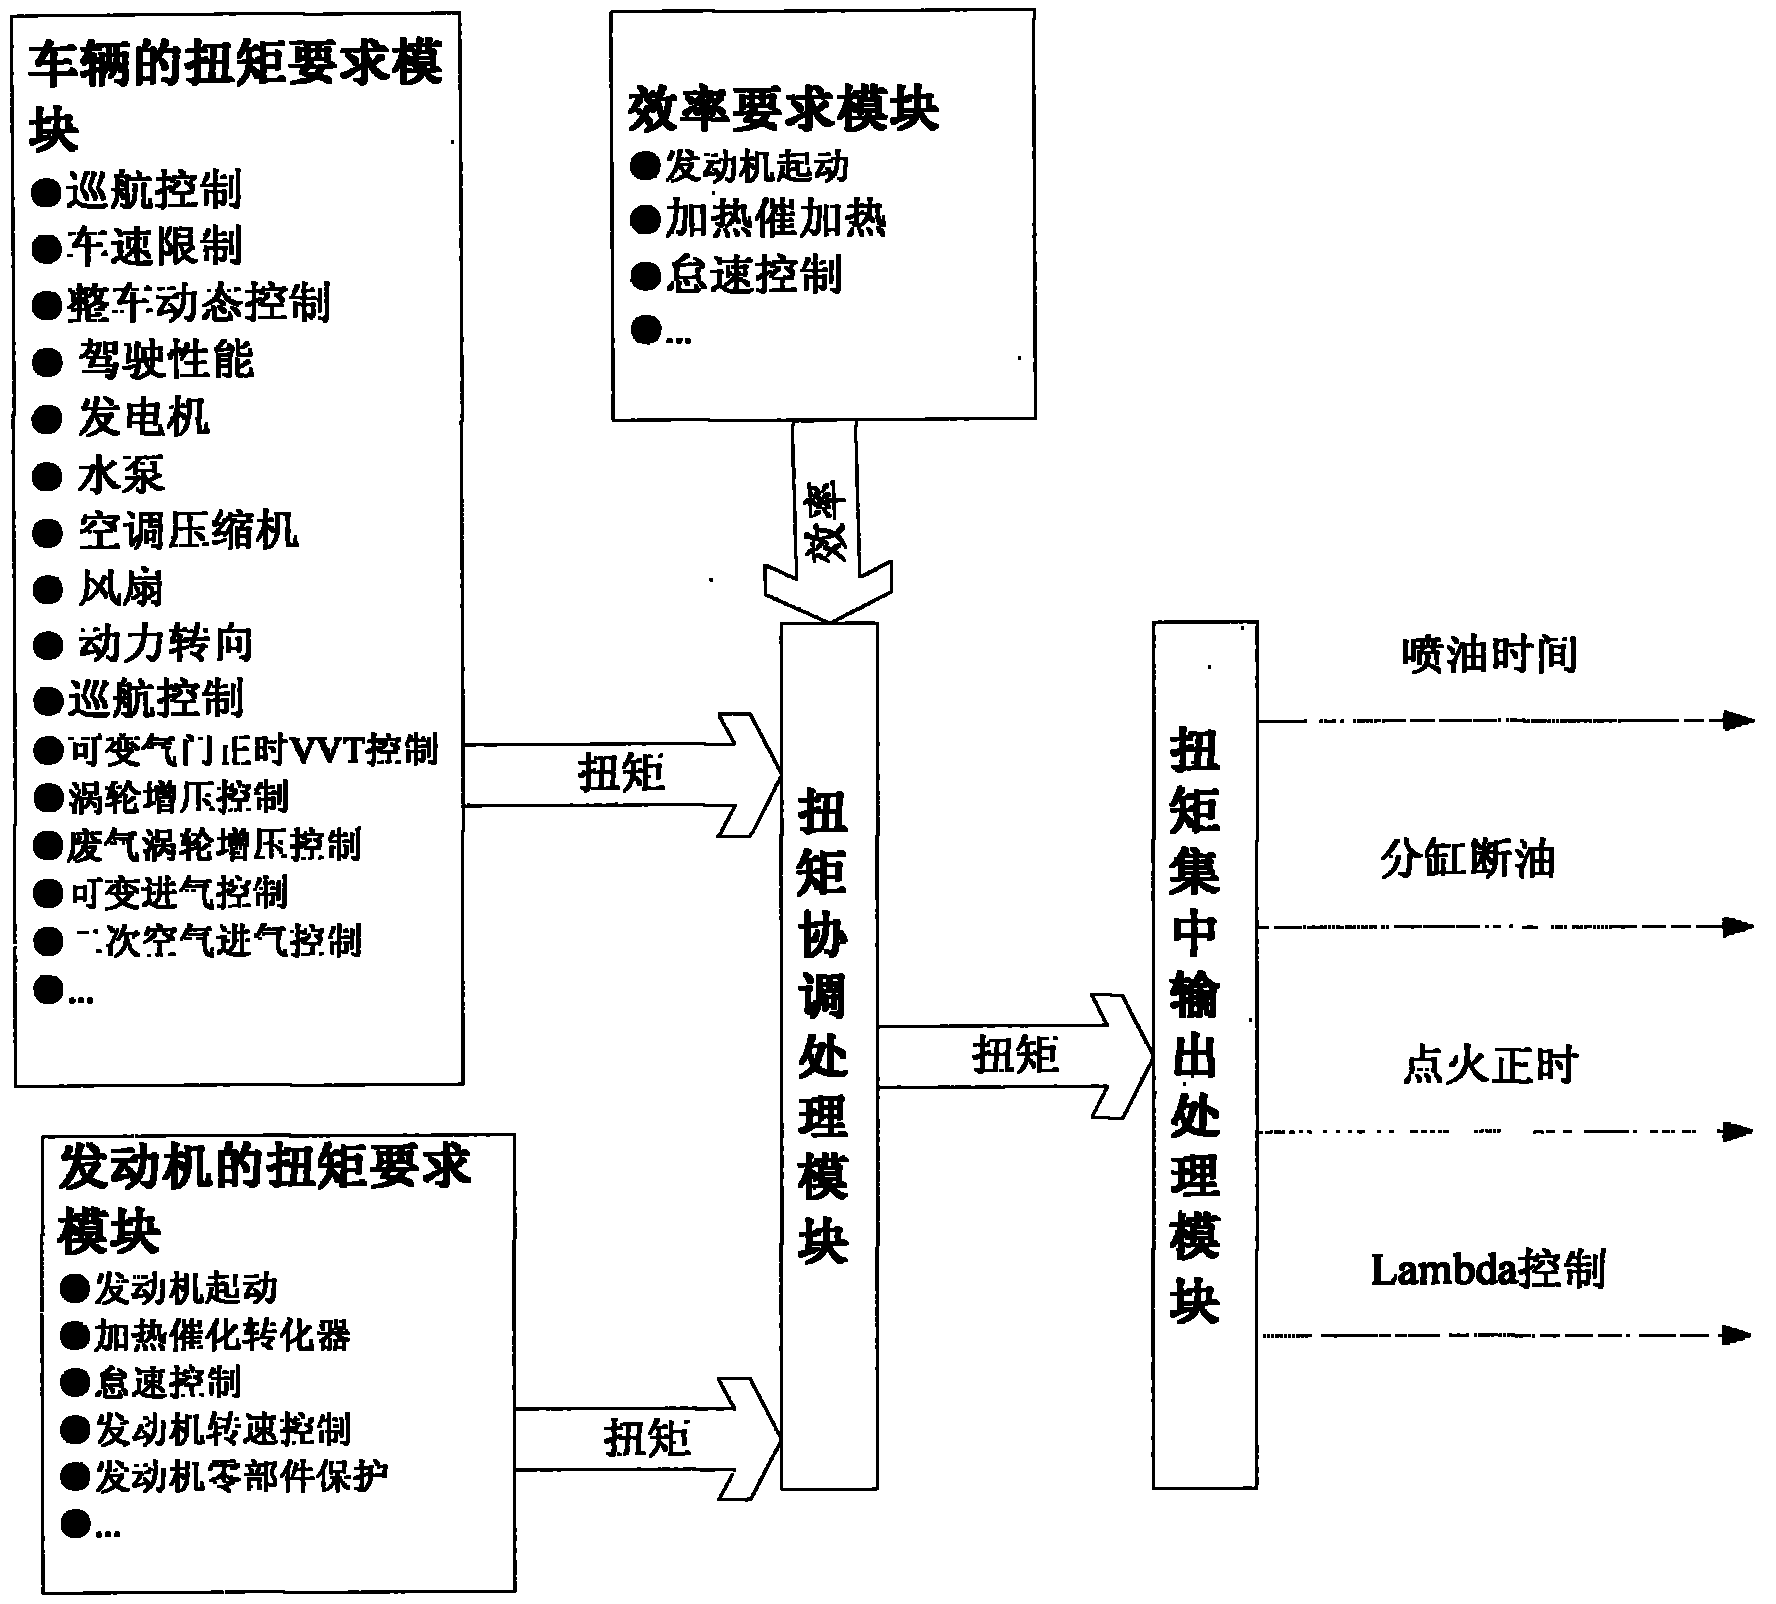 Engine electronic fuel injection control system based on torque control